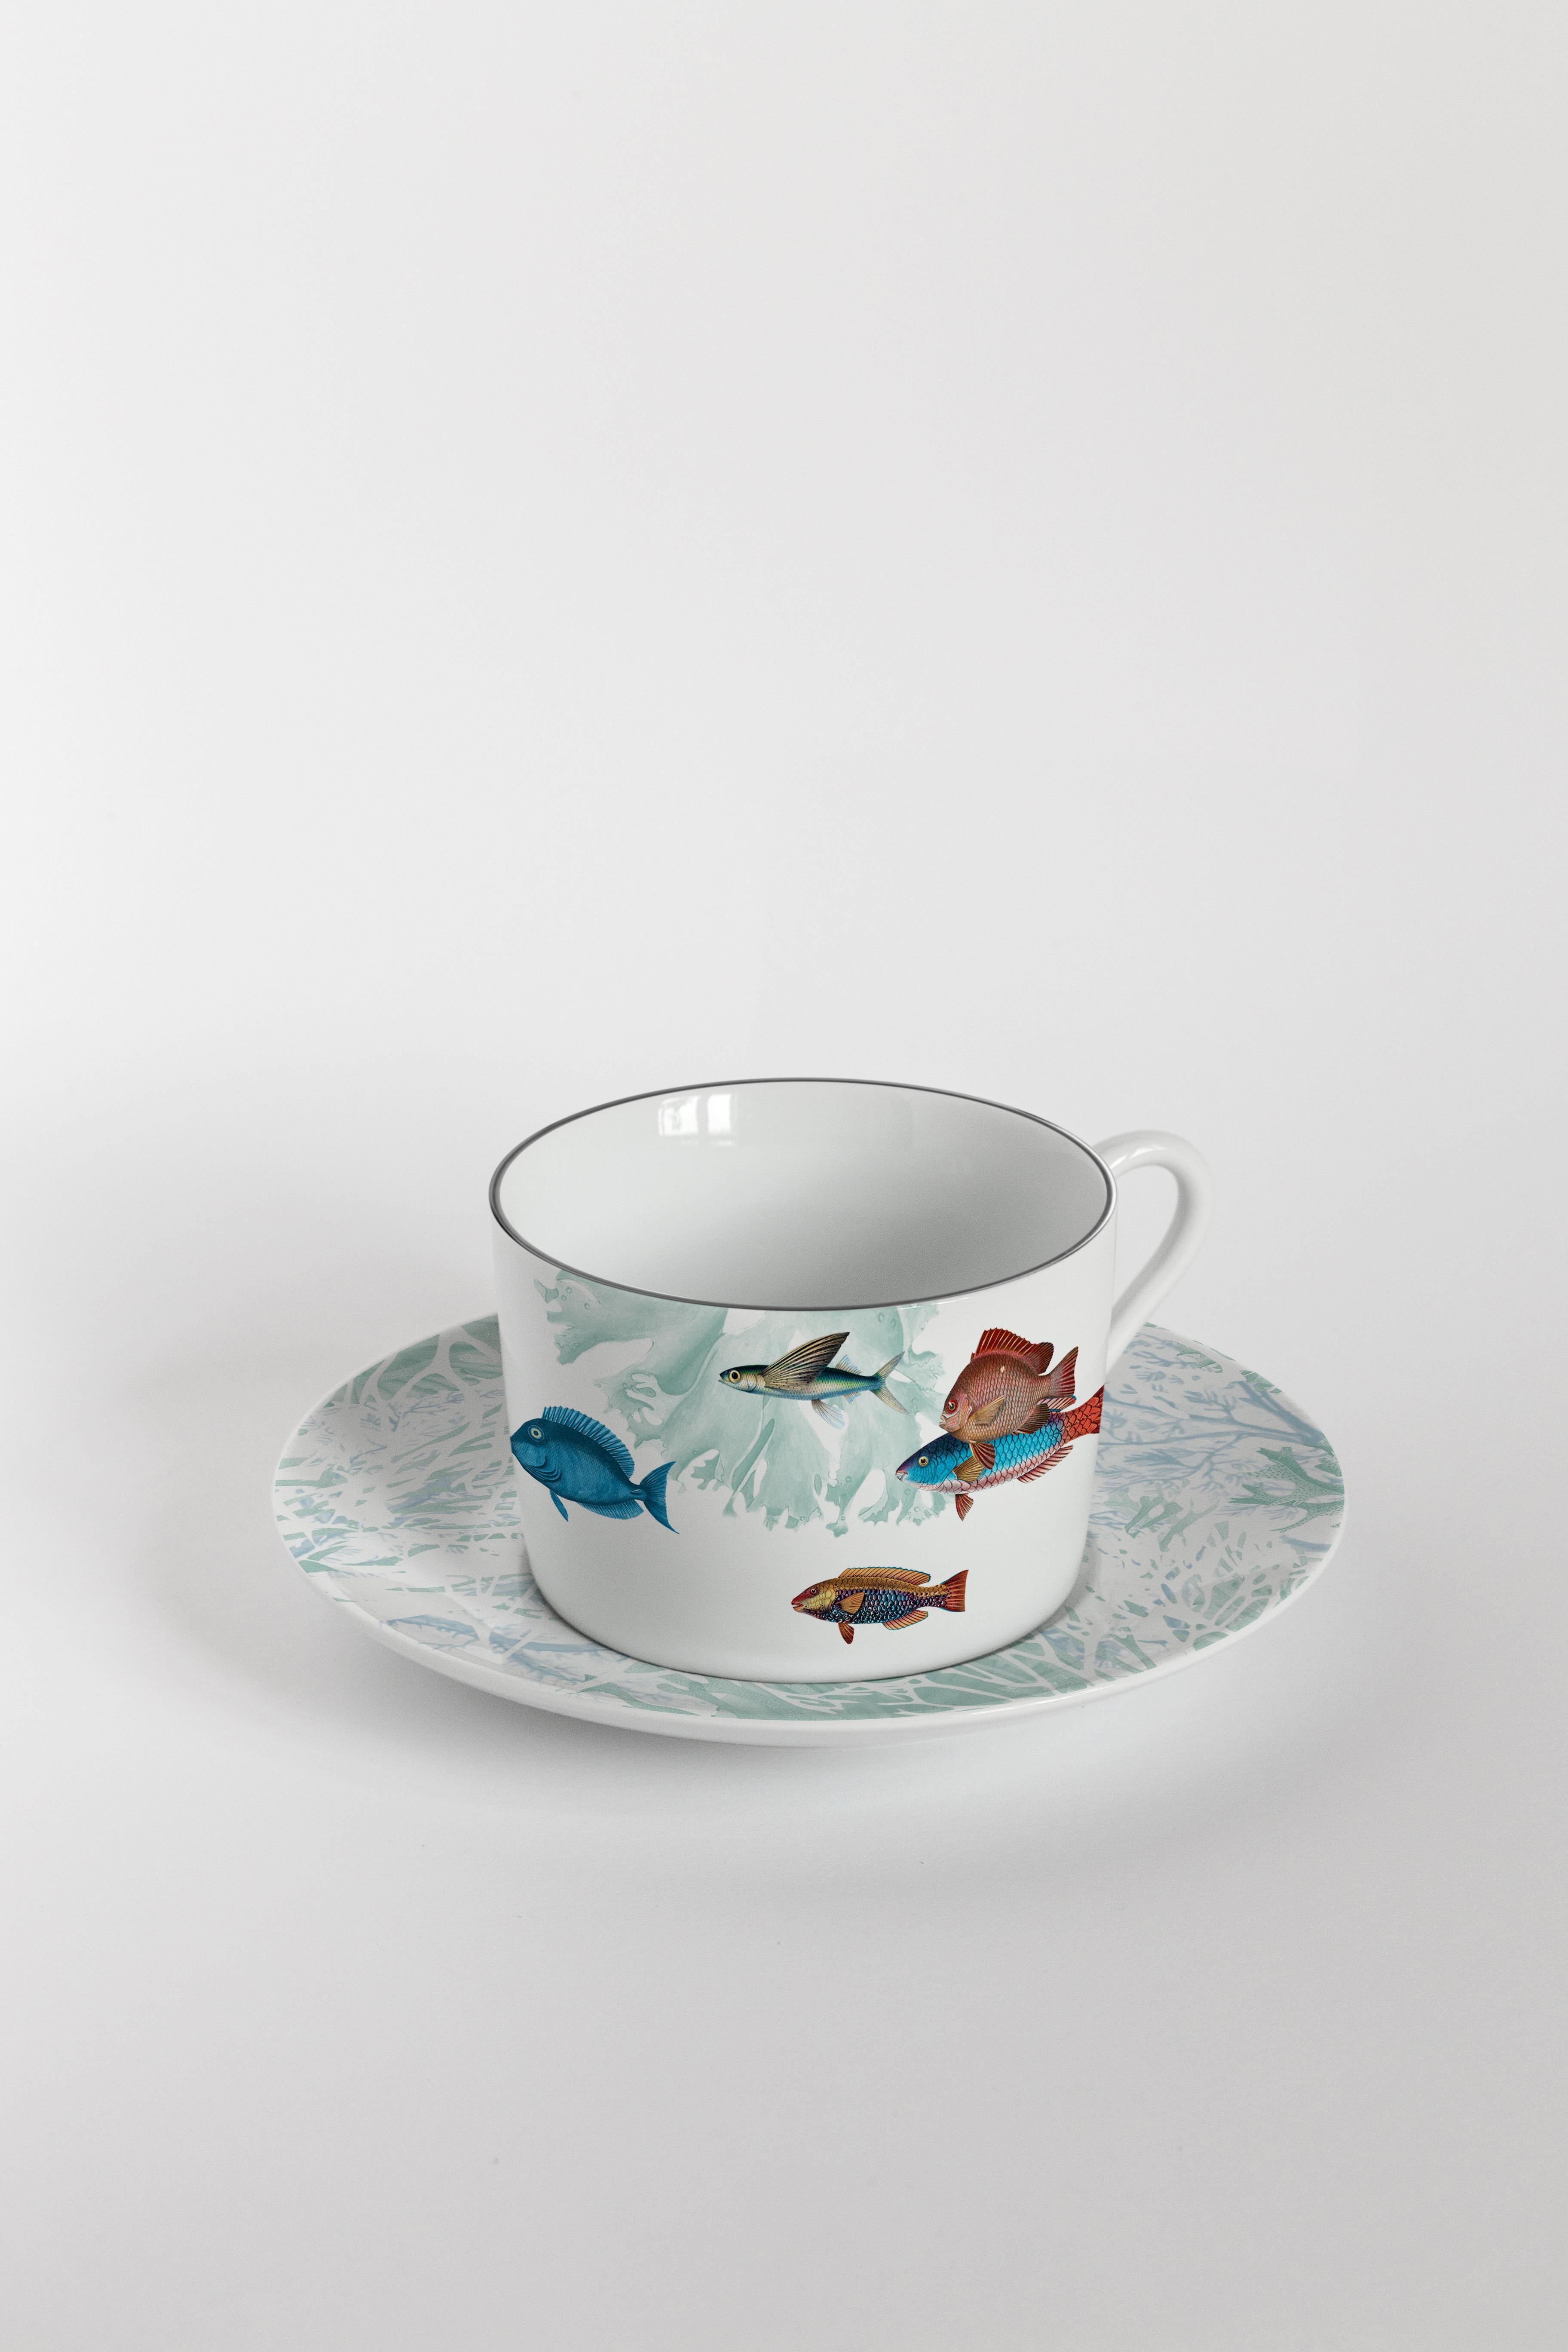 Inspired by the coral reef of the Amami Islands in Japan, the Amami collection features tropical fishes and beautiful seaweed. A perfect choice for every spot near the seaside.
Tea set with 6 coffee cups and plates.